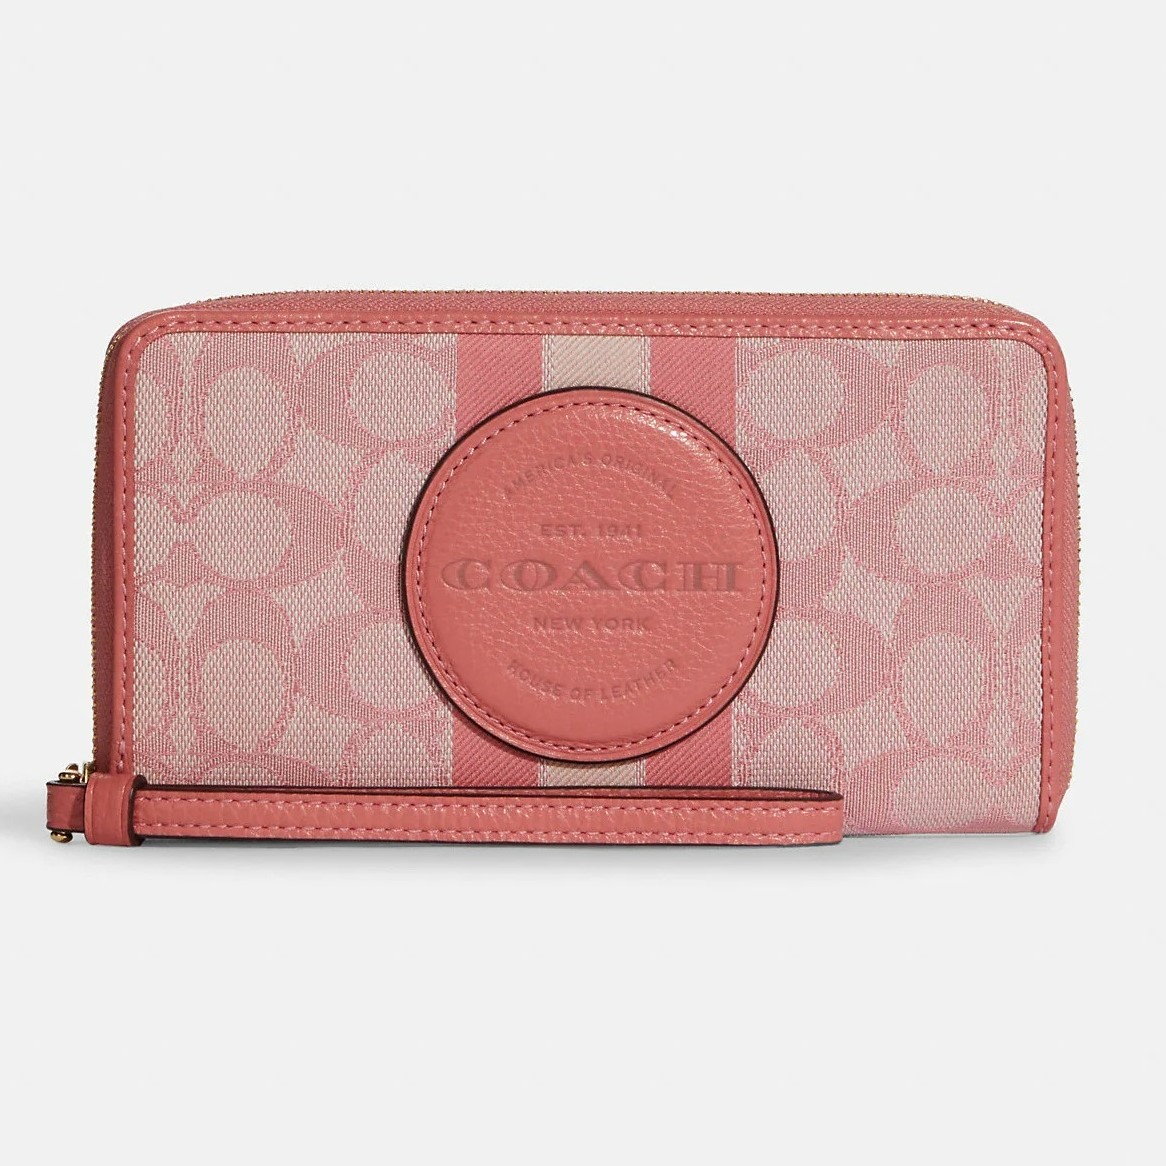 VÍ DÀI NỮ COACH DEMPSEY LARGE PHONE WALLET IN SIGNATURE JACQUARD WITH STRIPE AND COACH PATCH 1